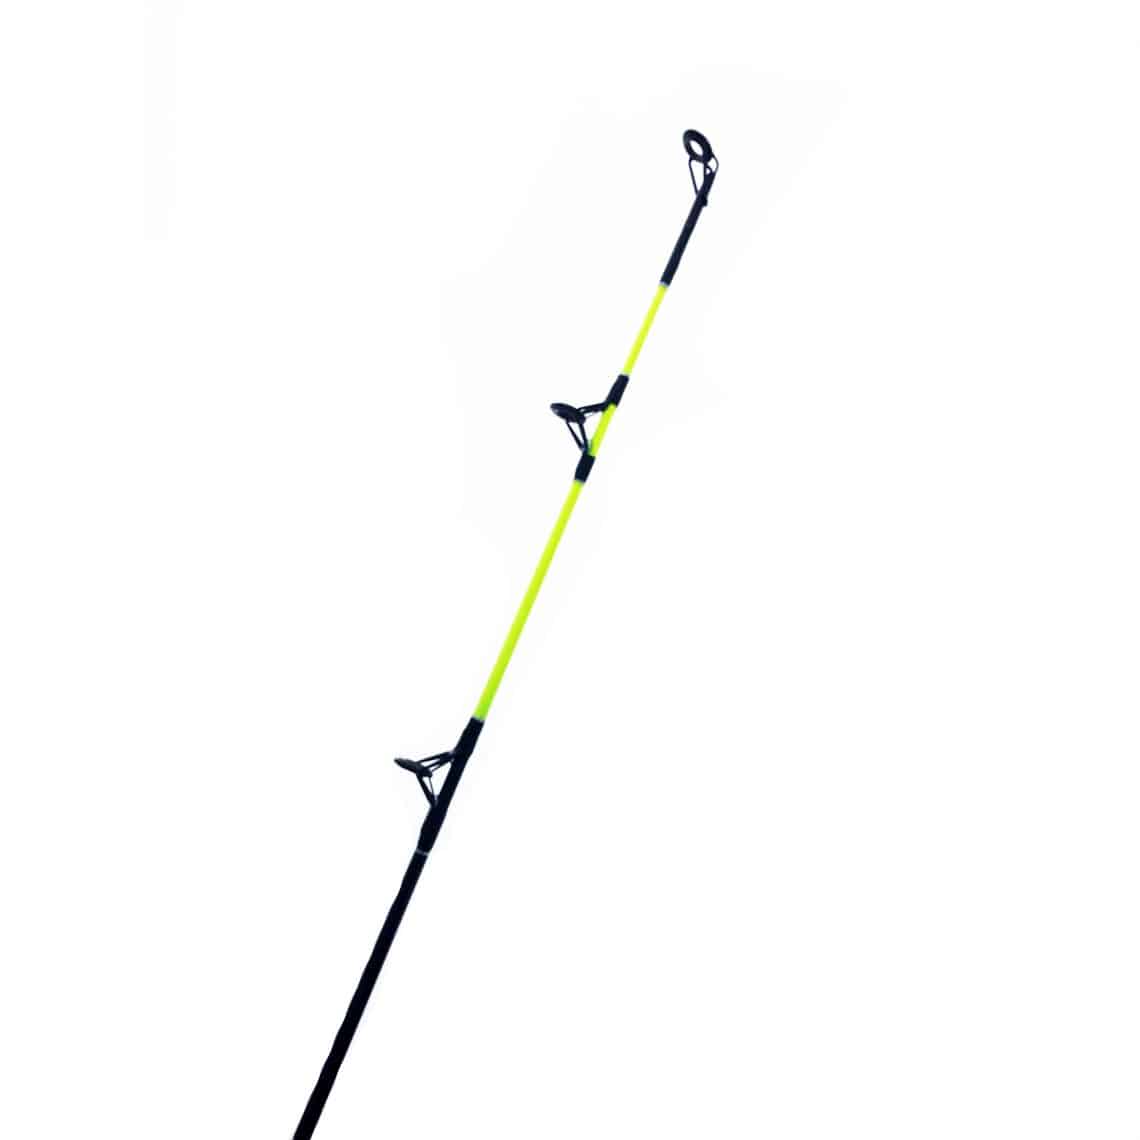 Lead Core Trolling Rod Chartreuse Tip 2 Pack CPLC-70CT Okuma Classic Pro 7' Med 